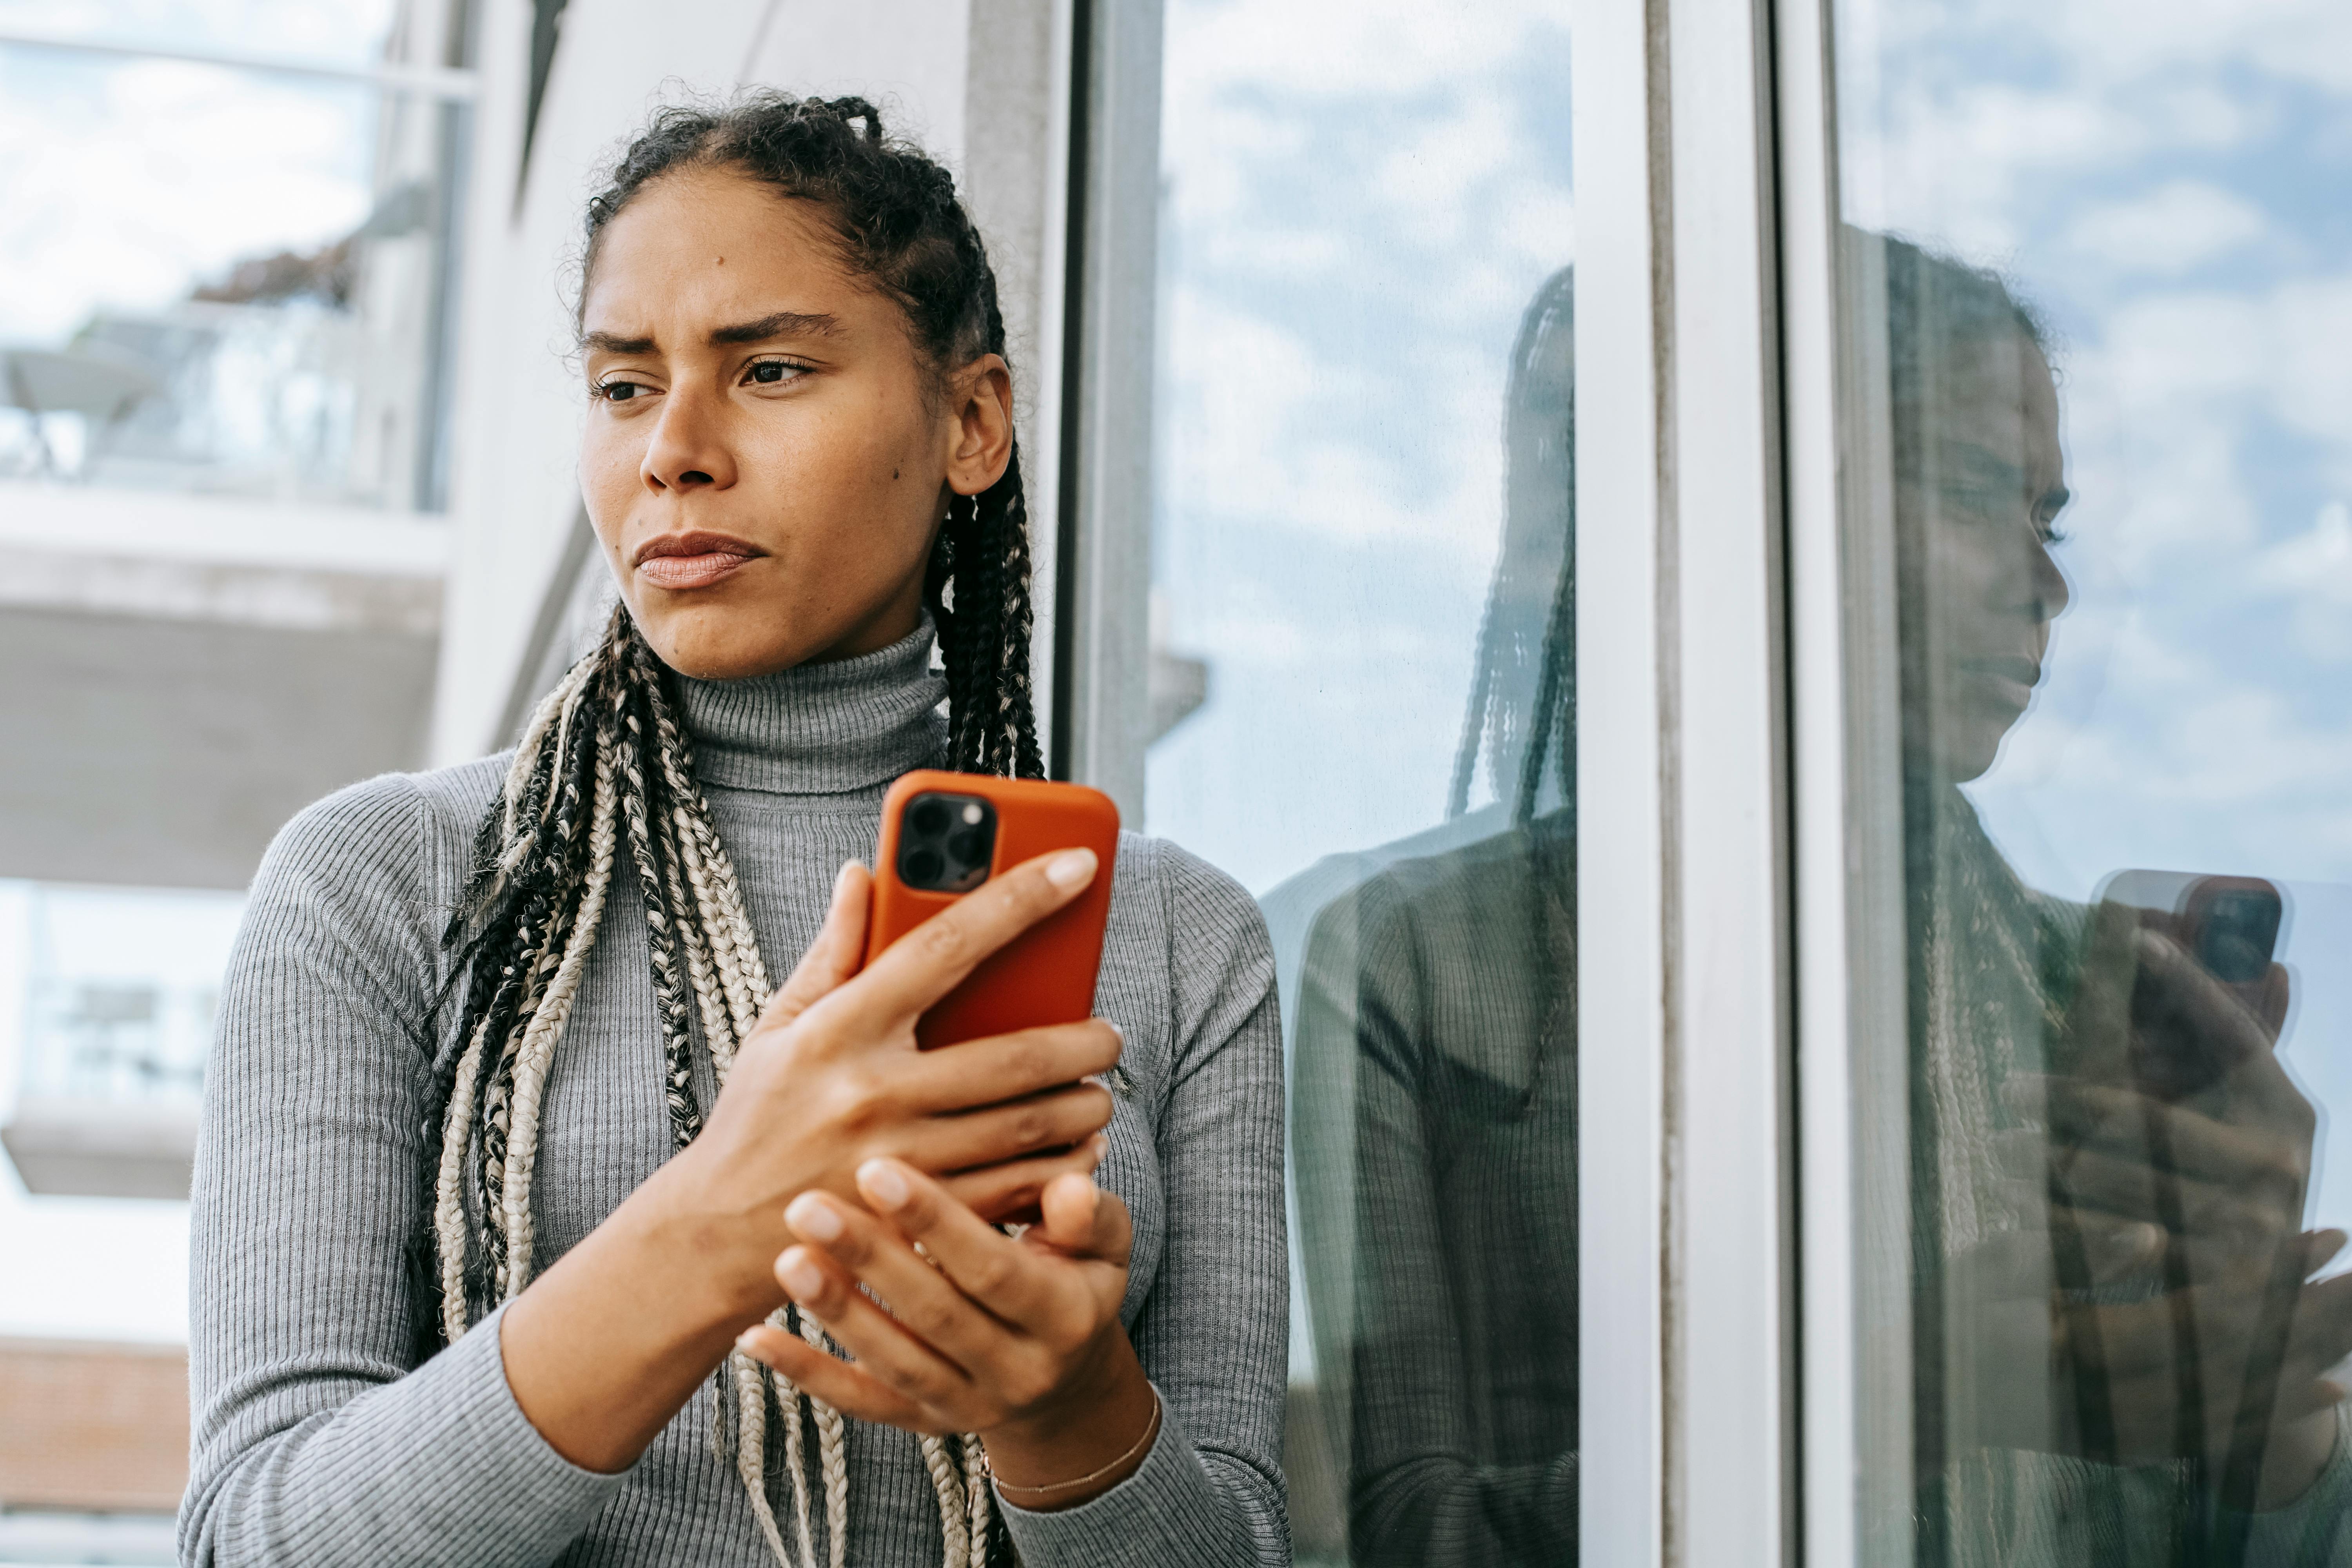 A woman looking to the side while contemplating something with her phone in hand | Source: Pexels